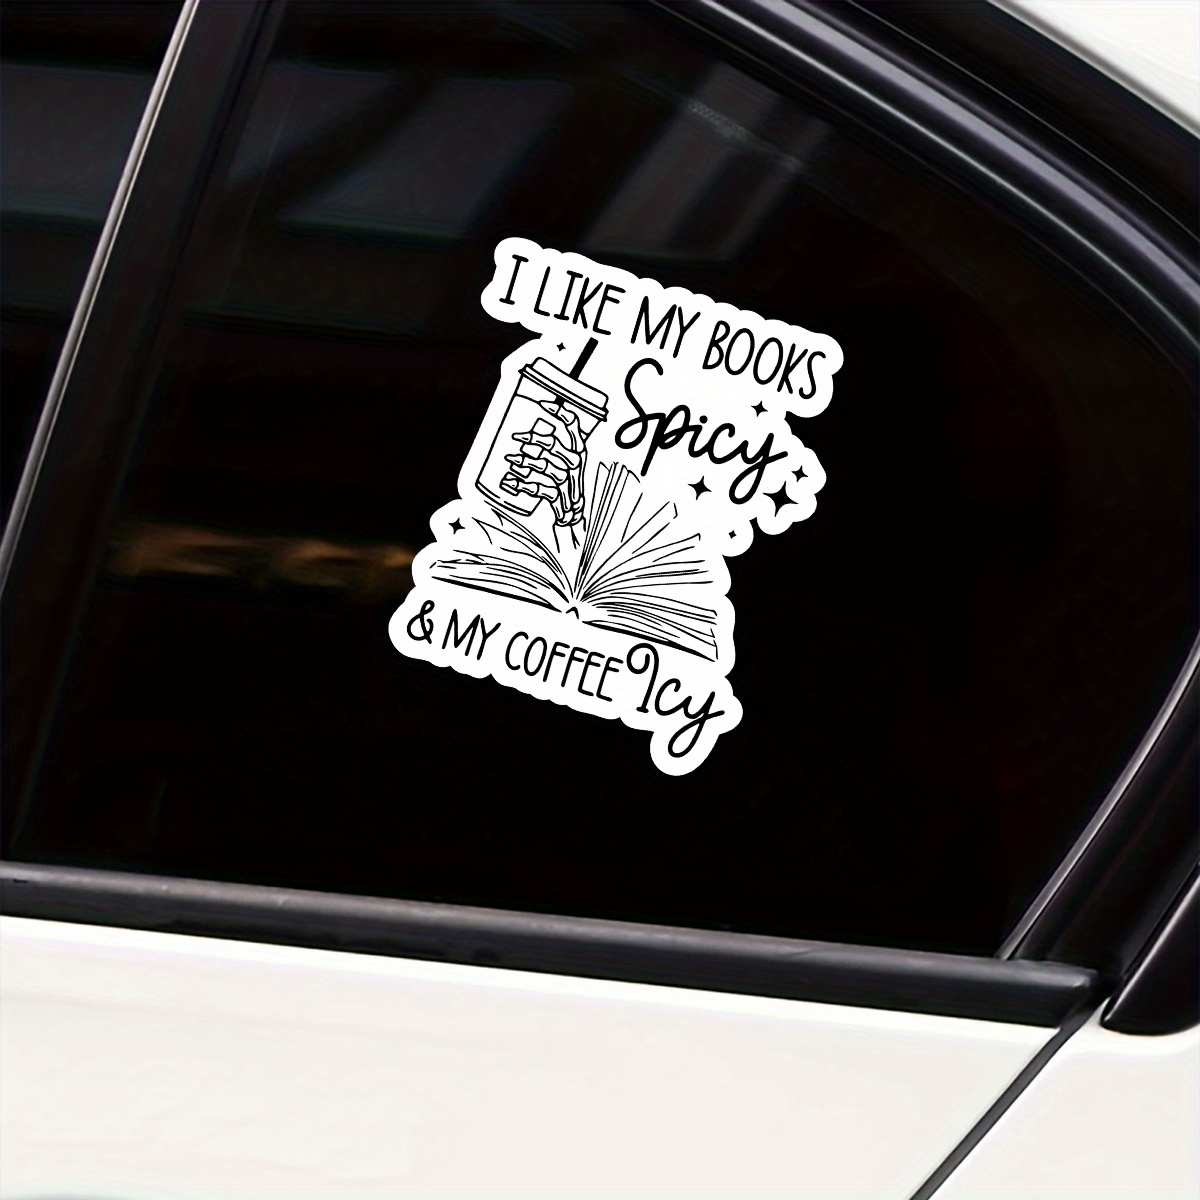 I Like My Books Spicy & My Coffee Icy Vinyl Decal - Matte Finish ...